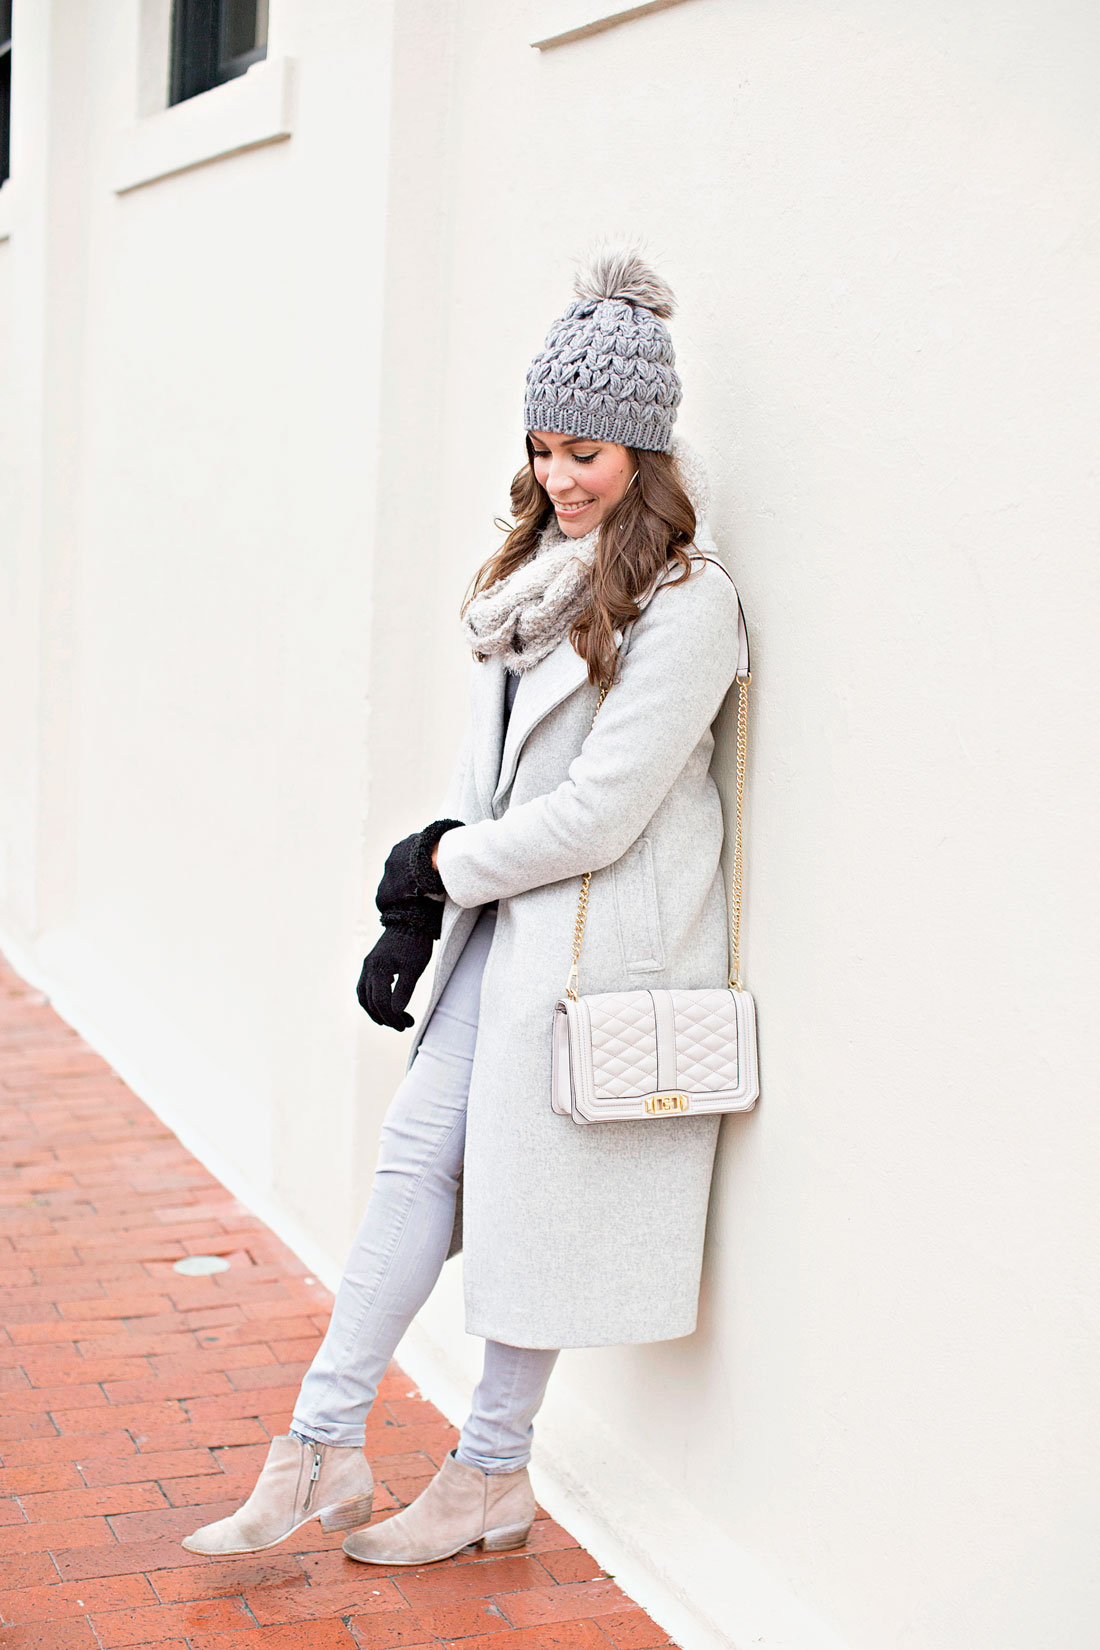 South Florida fashion blogger Amanda from A Glam Lifestyle wears grey monochrome travel outfit